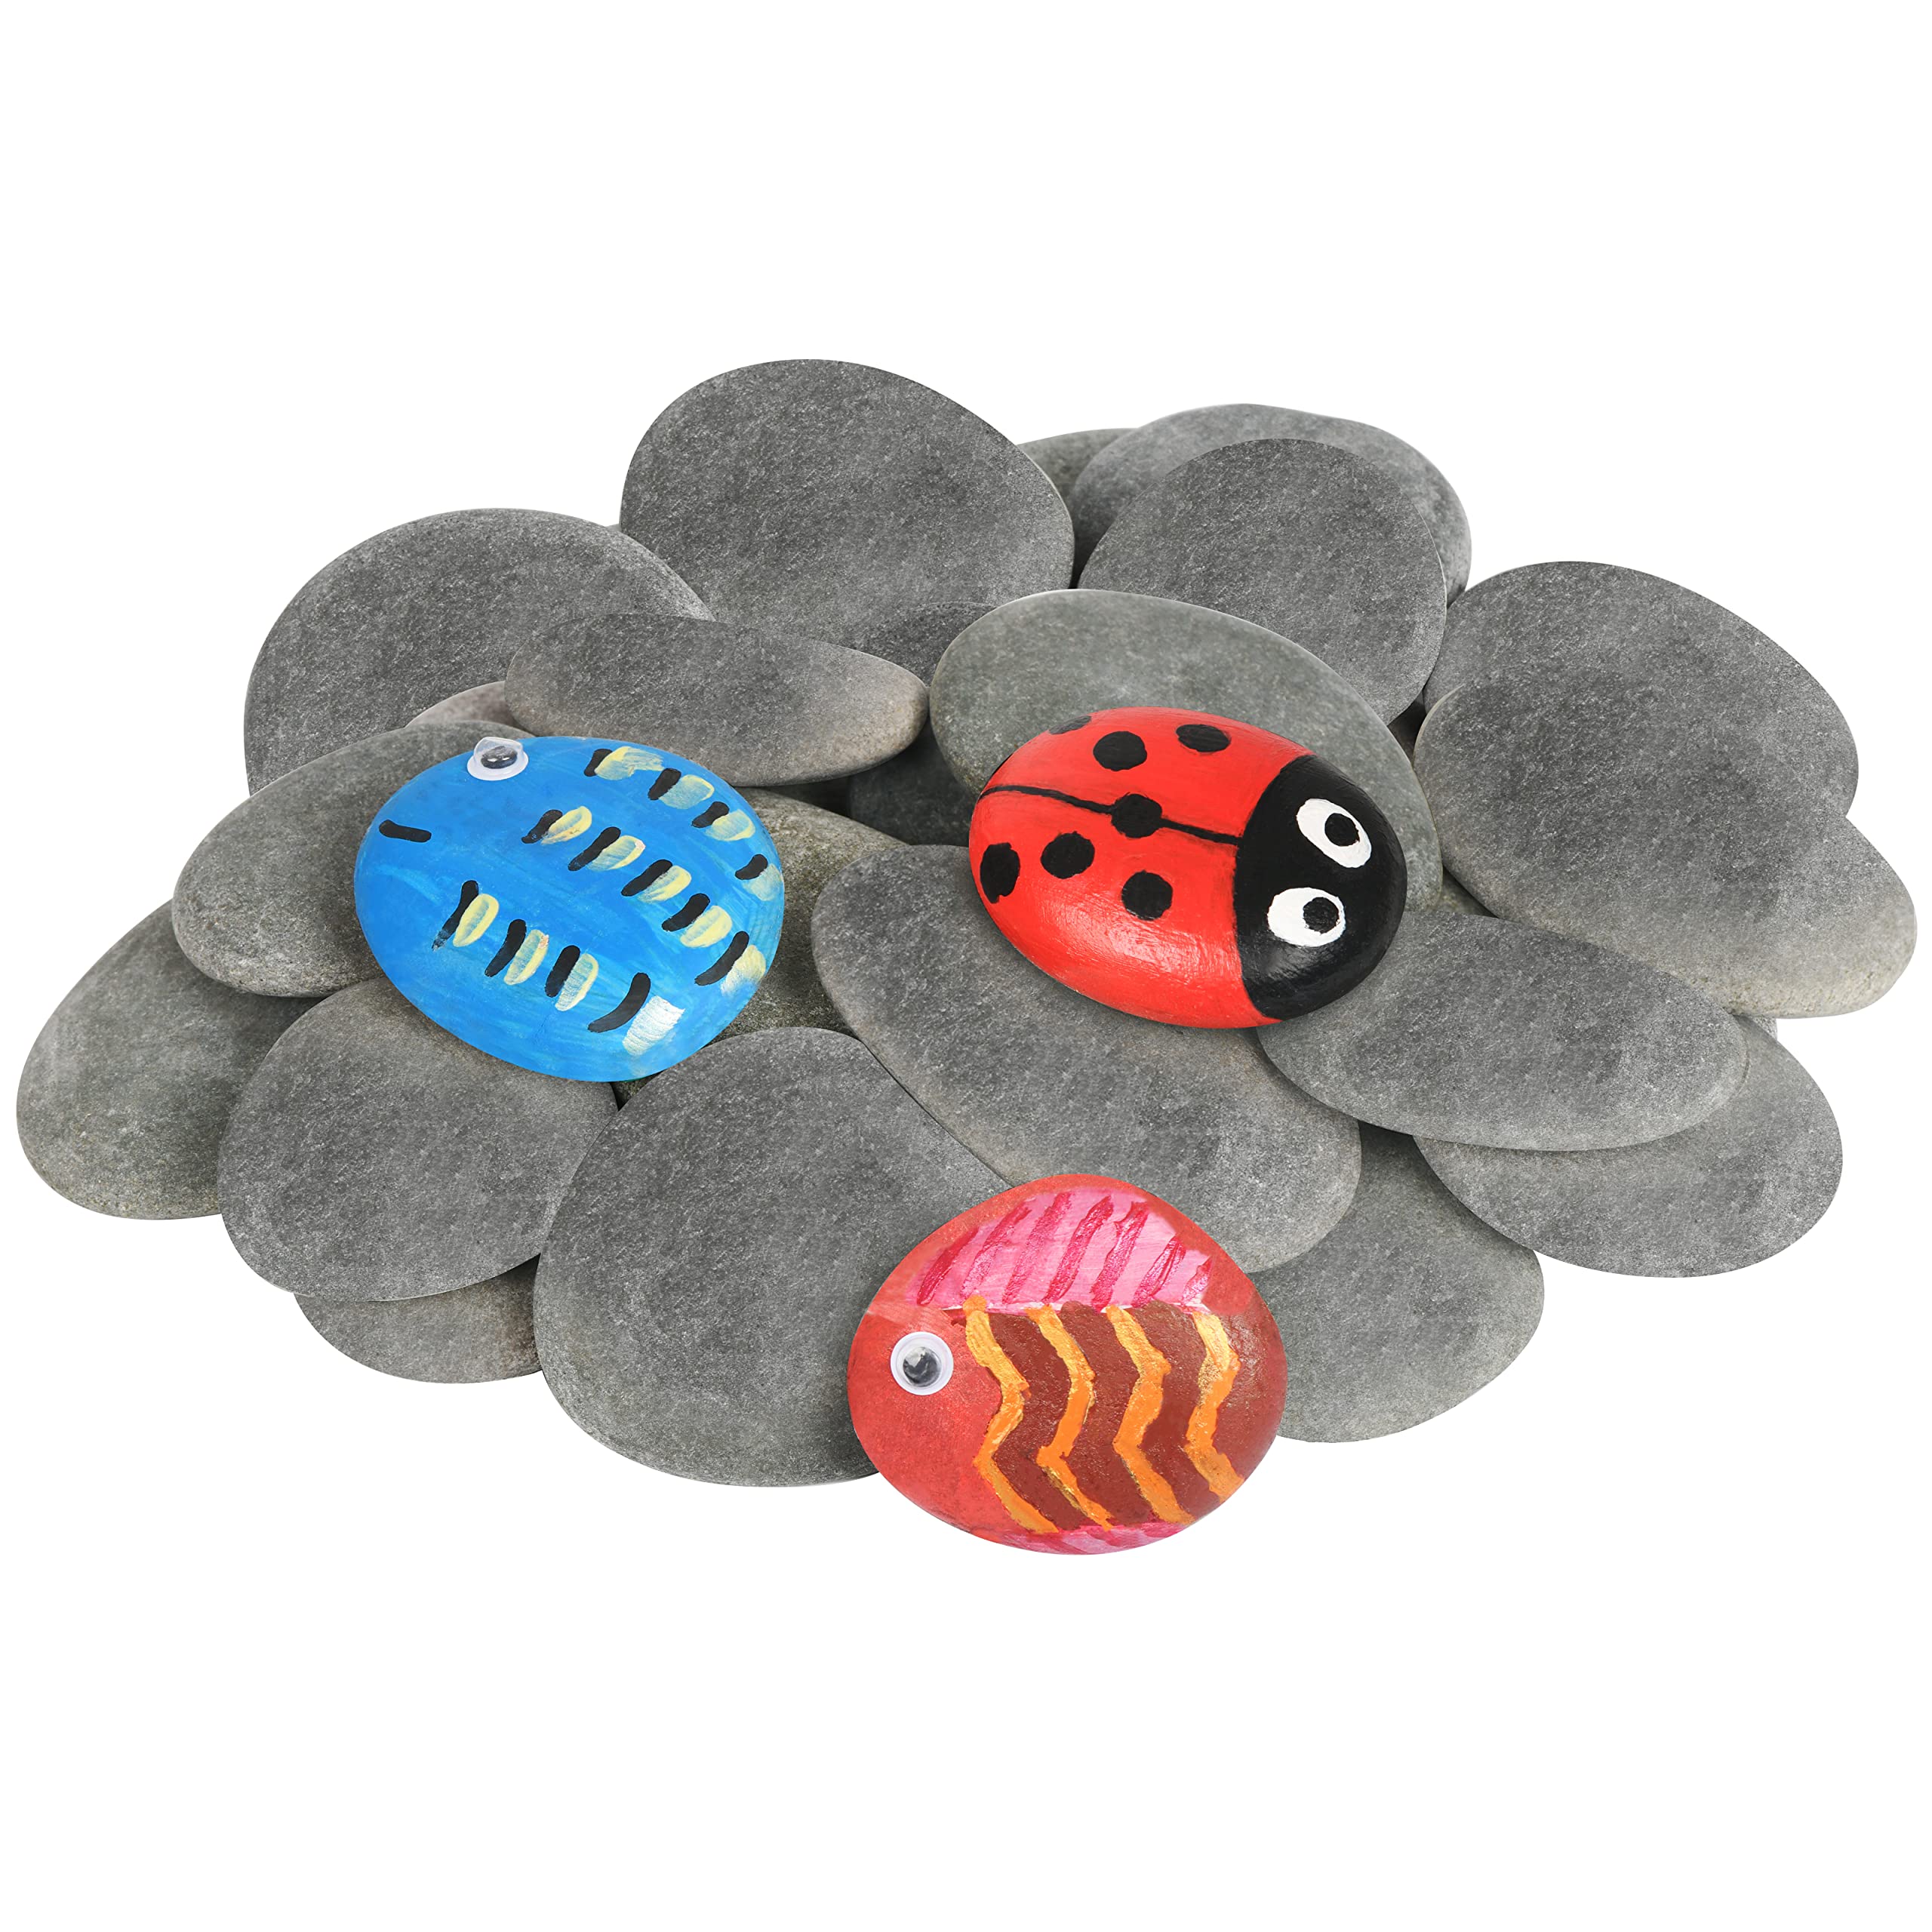 Simetufy 25 Pcs River Rocks for Painting 2-3 Painting Rocks Flat & Smooth Rocks  to Paint Hand Picked Natural Stones for Painting Cheap Crafts Rocks for  Kids & Adults flat rocks 25pcs